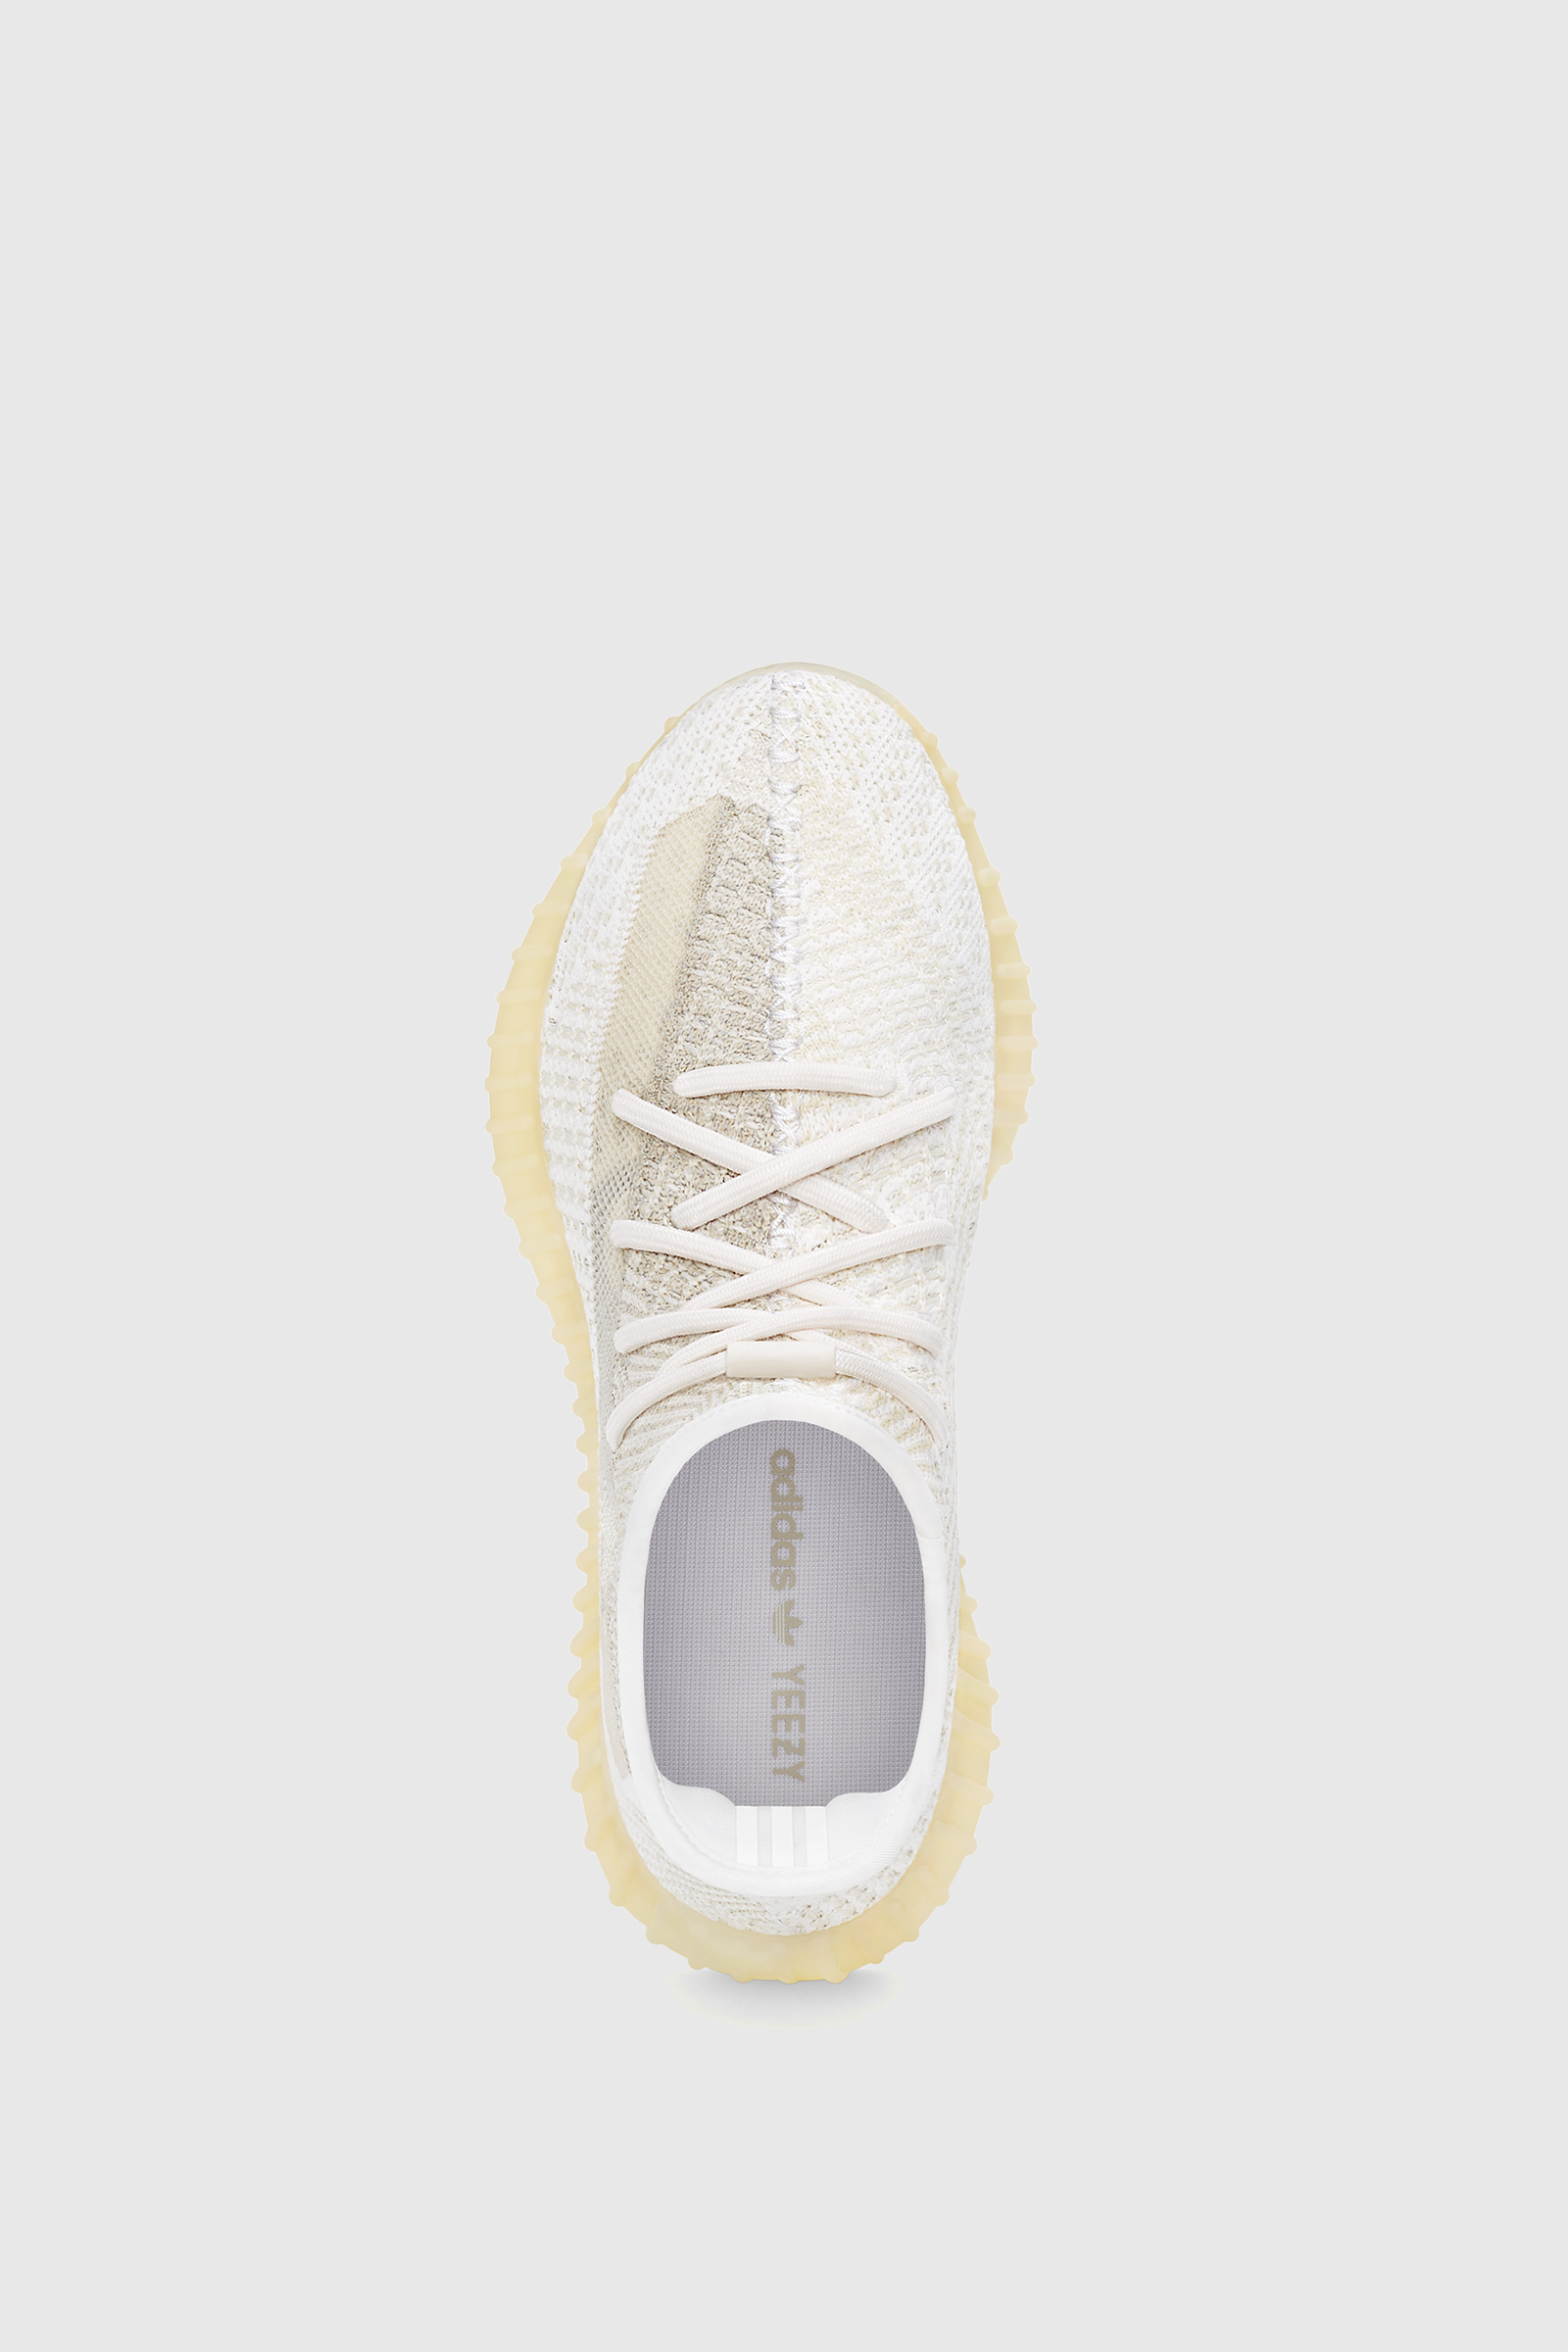 yeezy boost official site